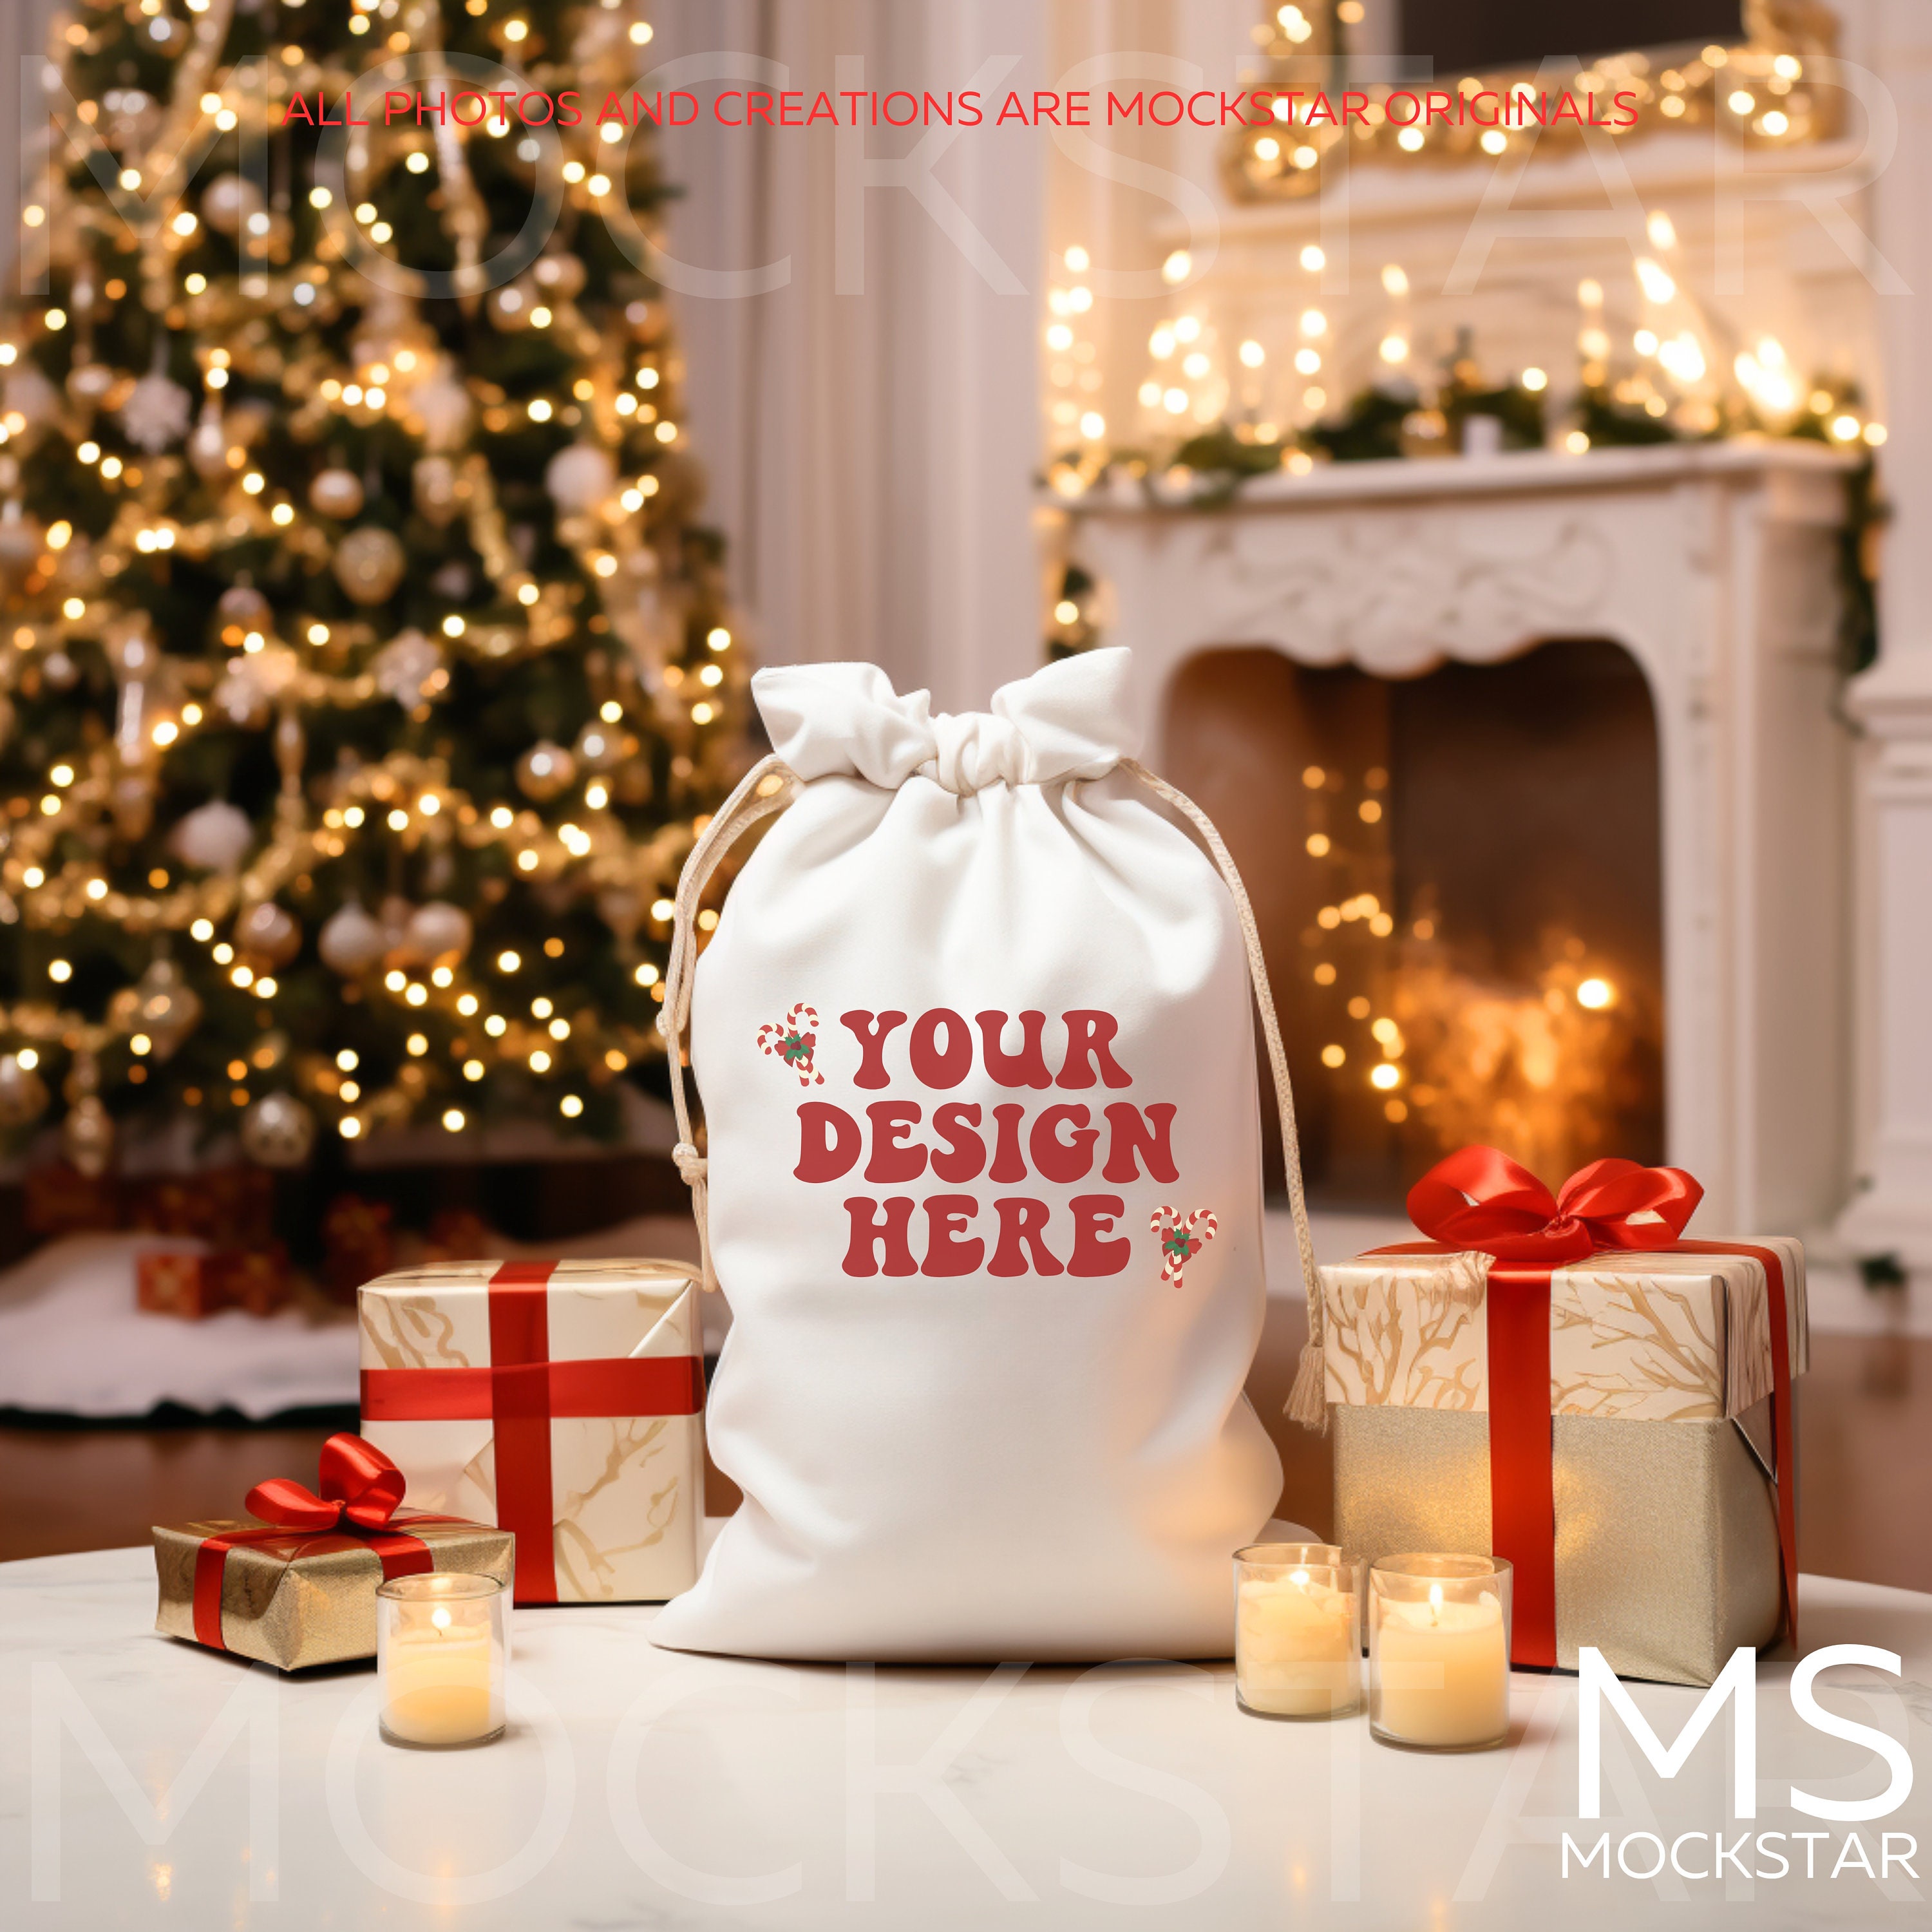 Oversized Christmas Gift Sack Bags 100% Polyester Canvas Blank Sublimation  Bulk Santa Sack With Red Drawstring For Gift First Month Free Storage From  Homelife999, $2.73